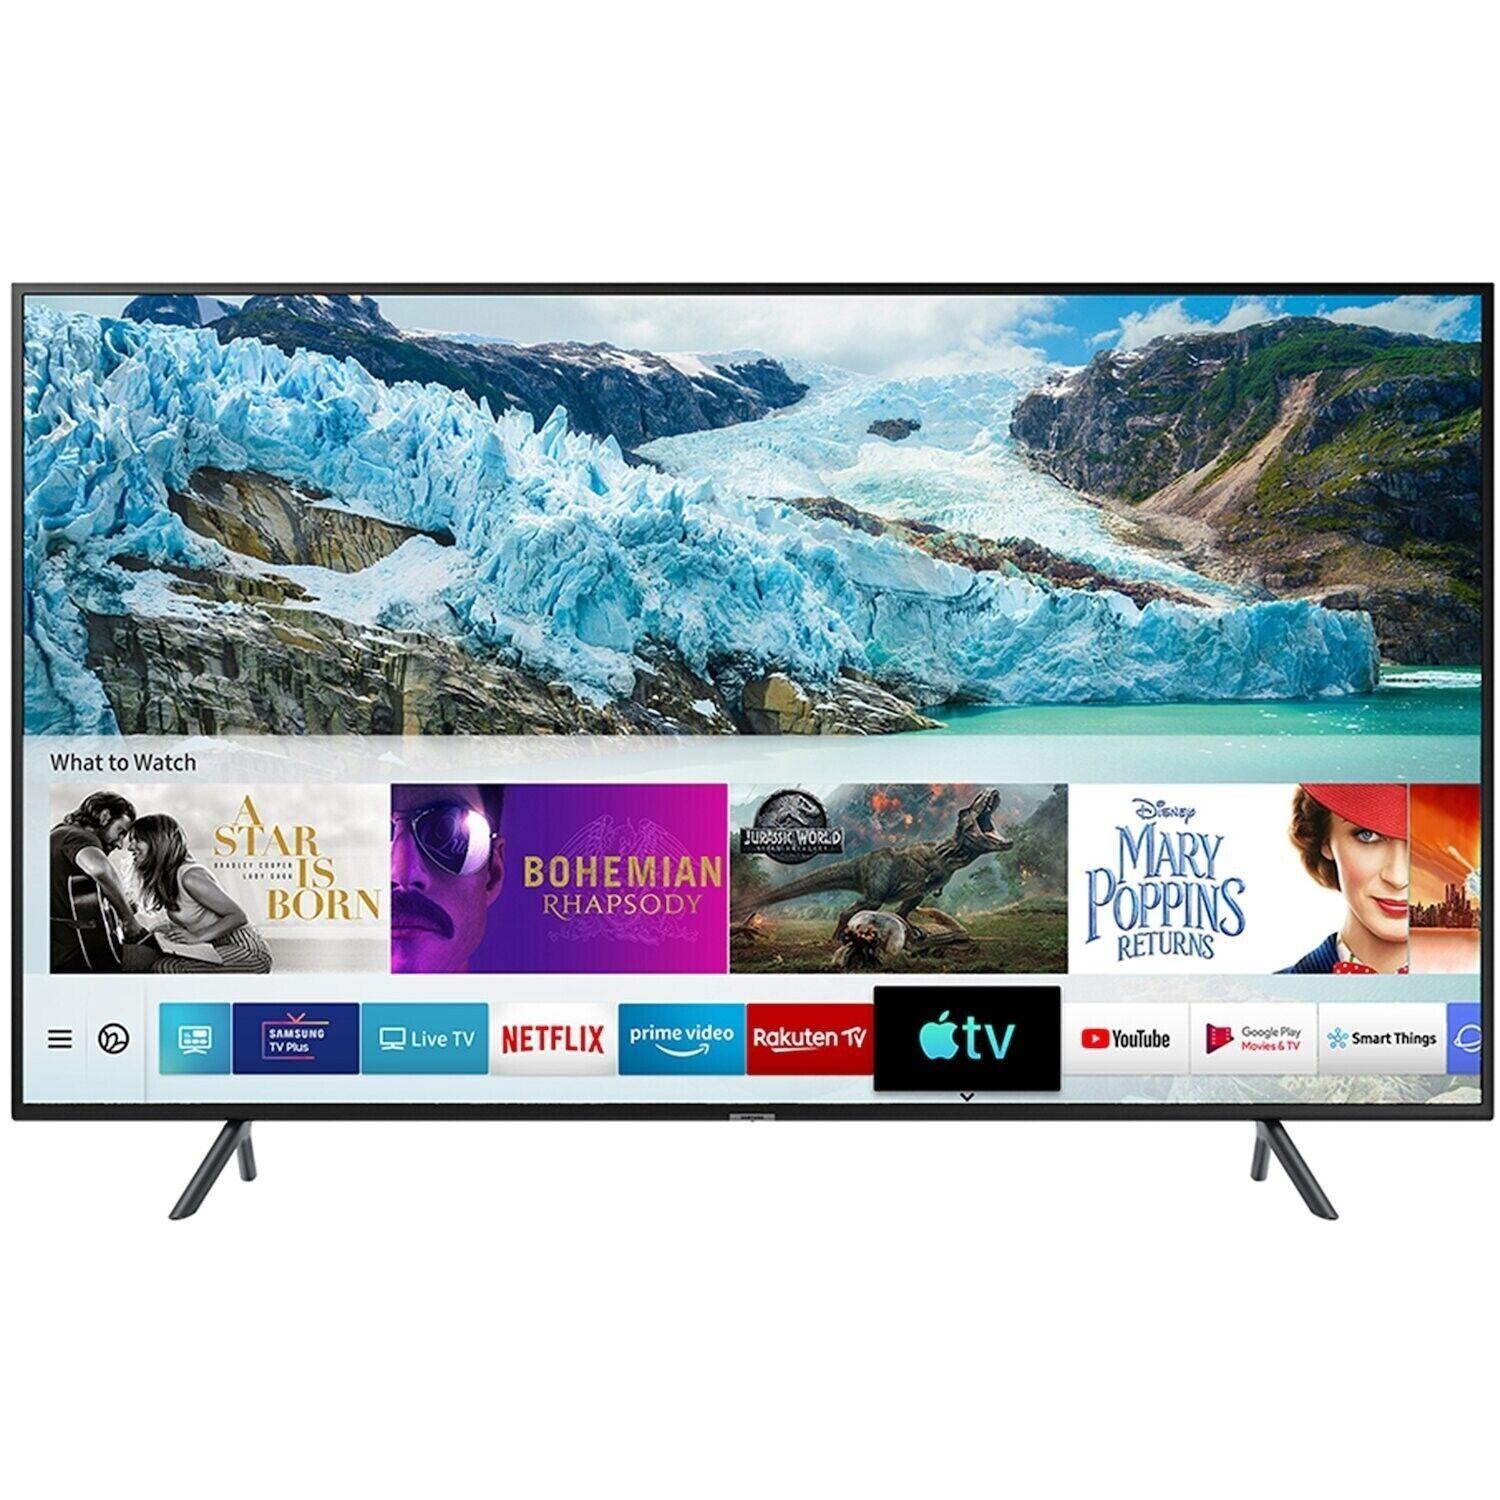 SAMSUNG 50 INCH UE50RU7100KXXU SMART 4K HDR LED TV COLLECTION ONLY U NO STAND - Smart Clear Vision